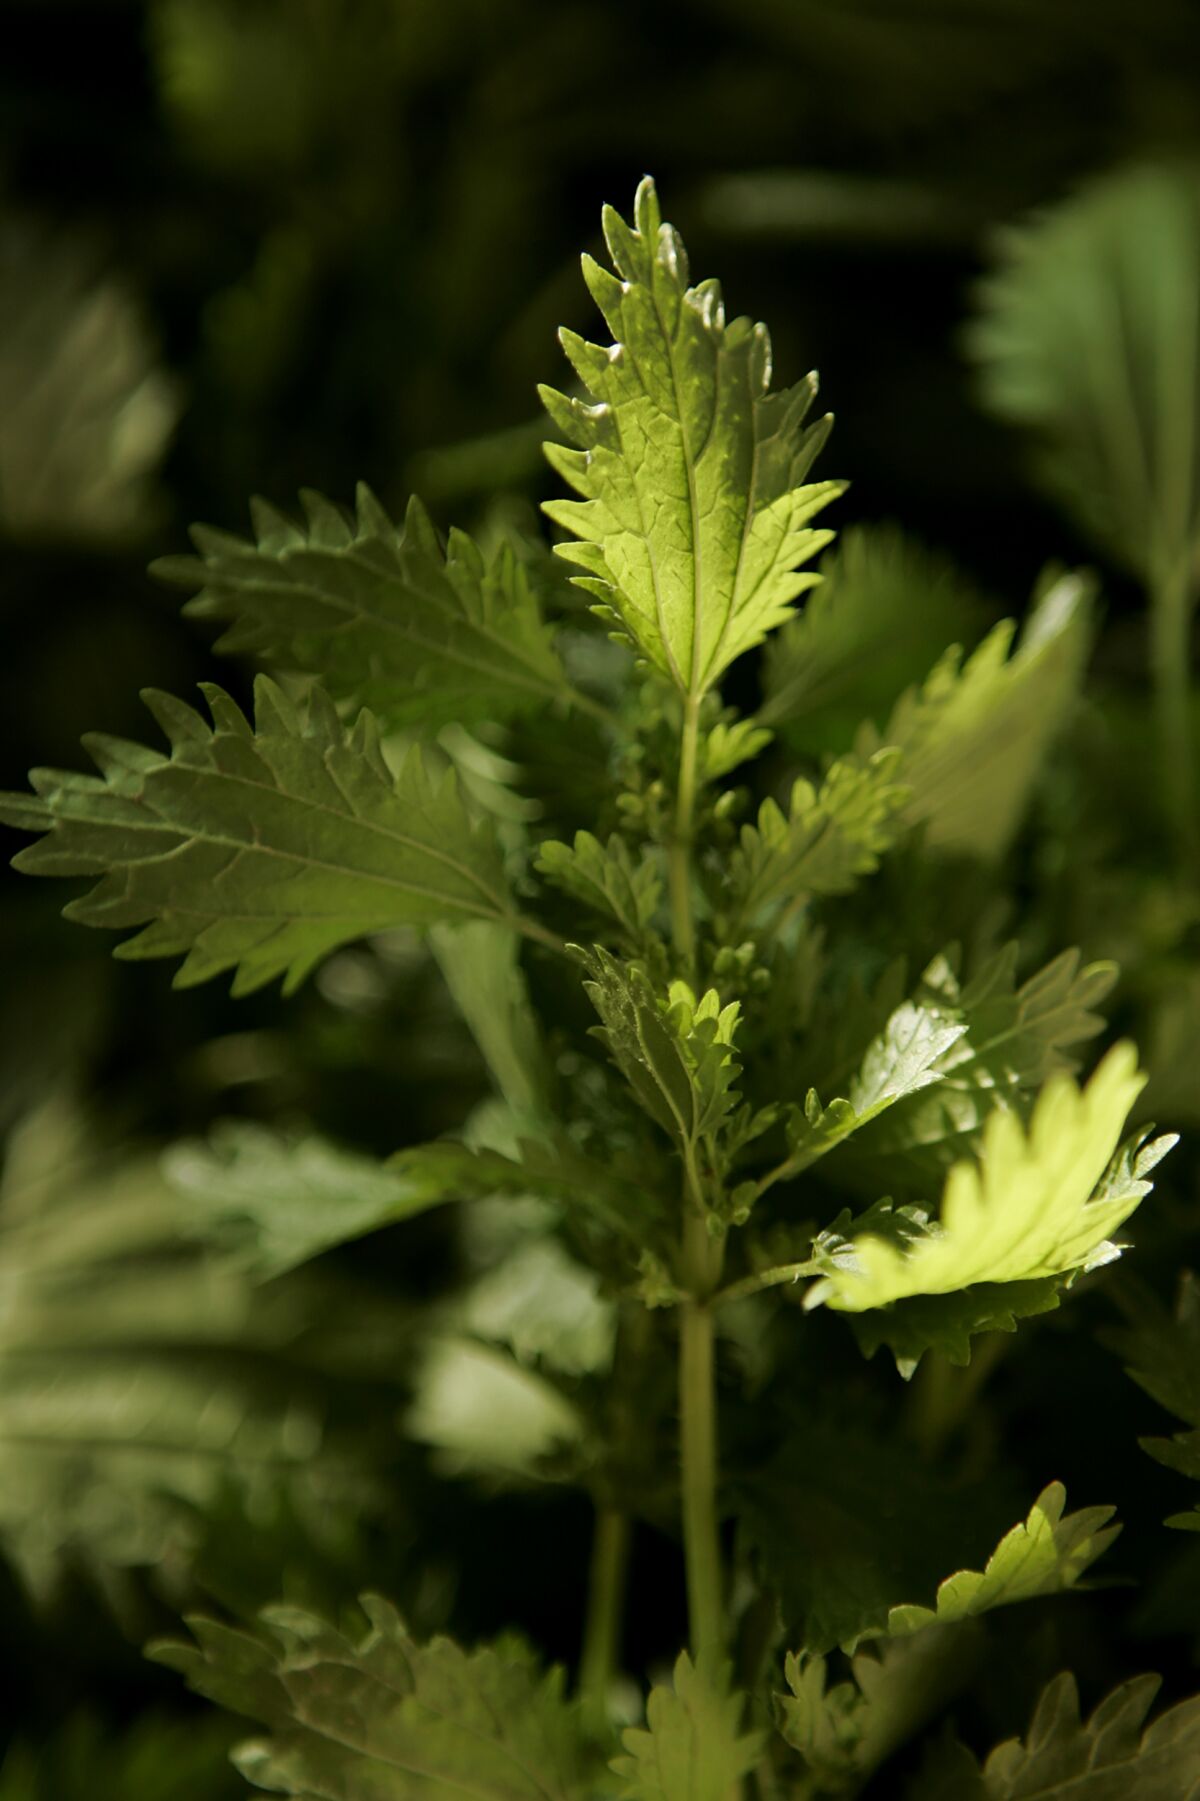 Stinging nettle grows along fence rows, river banks and roadsides.